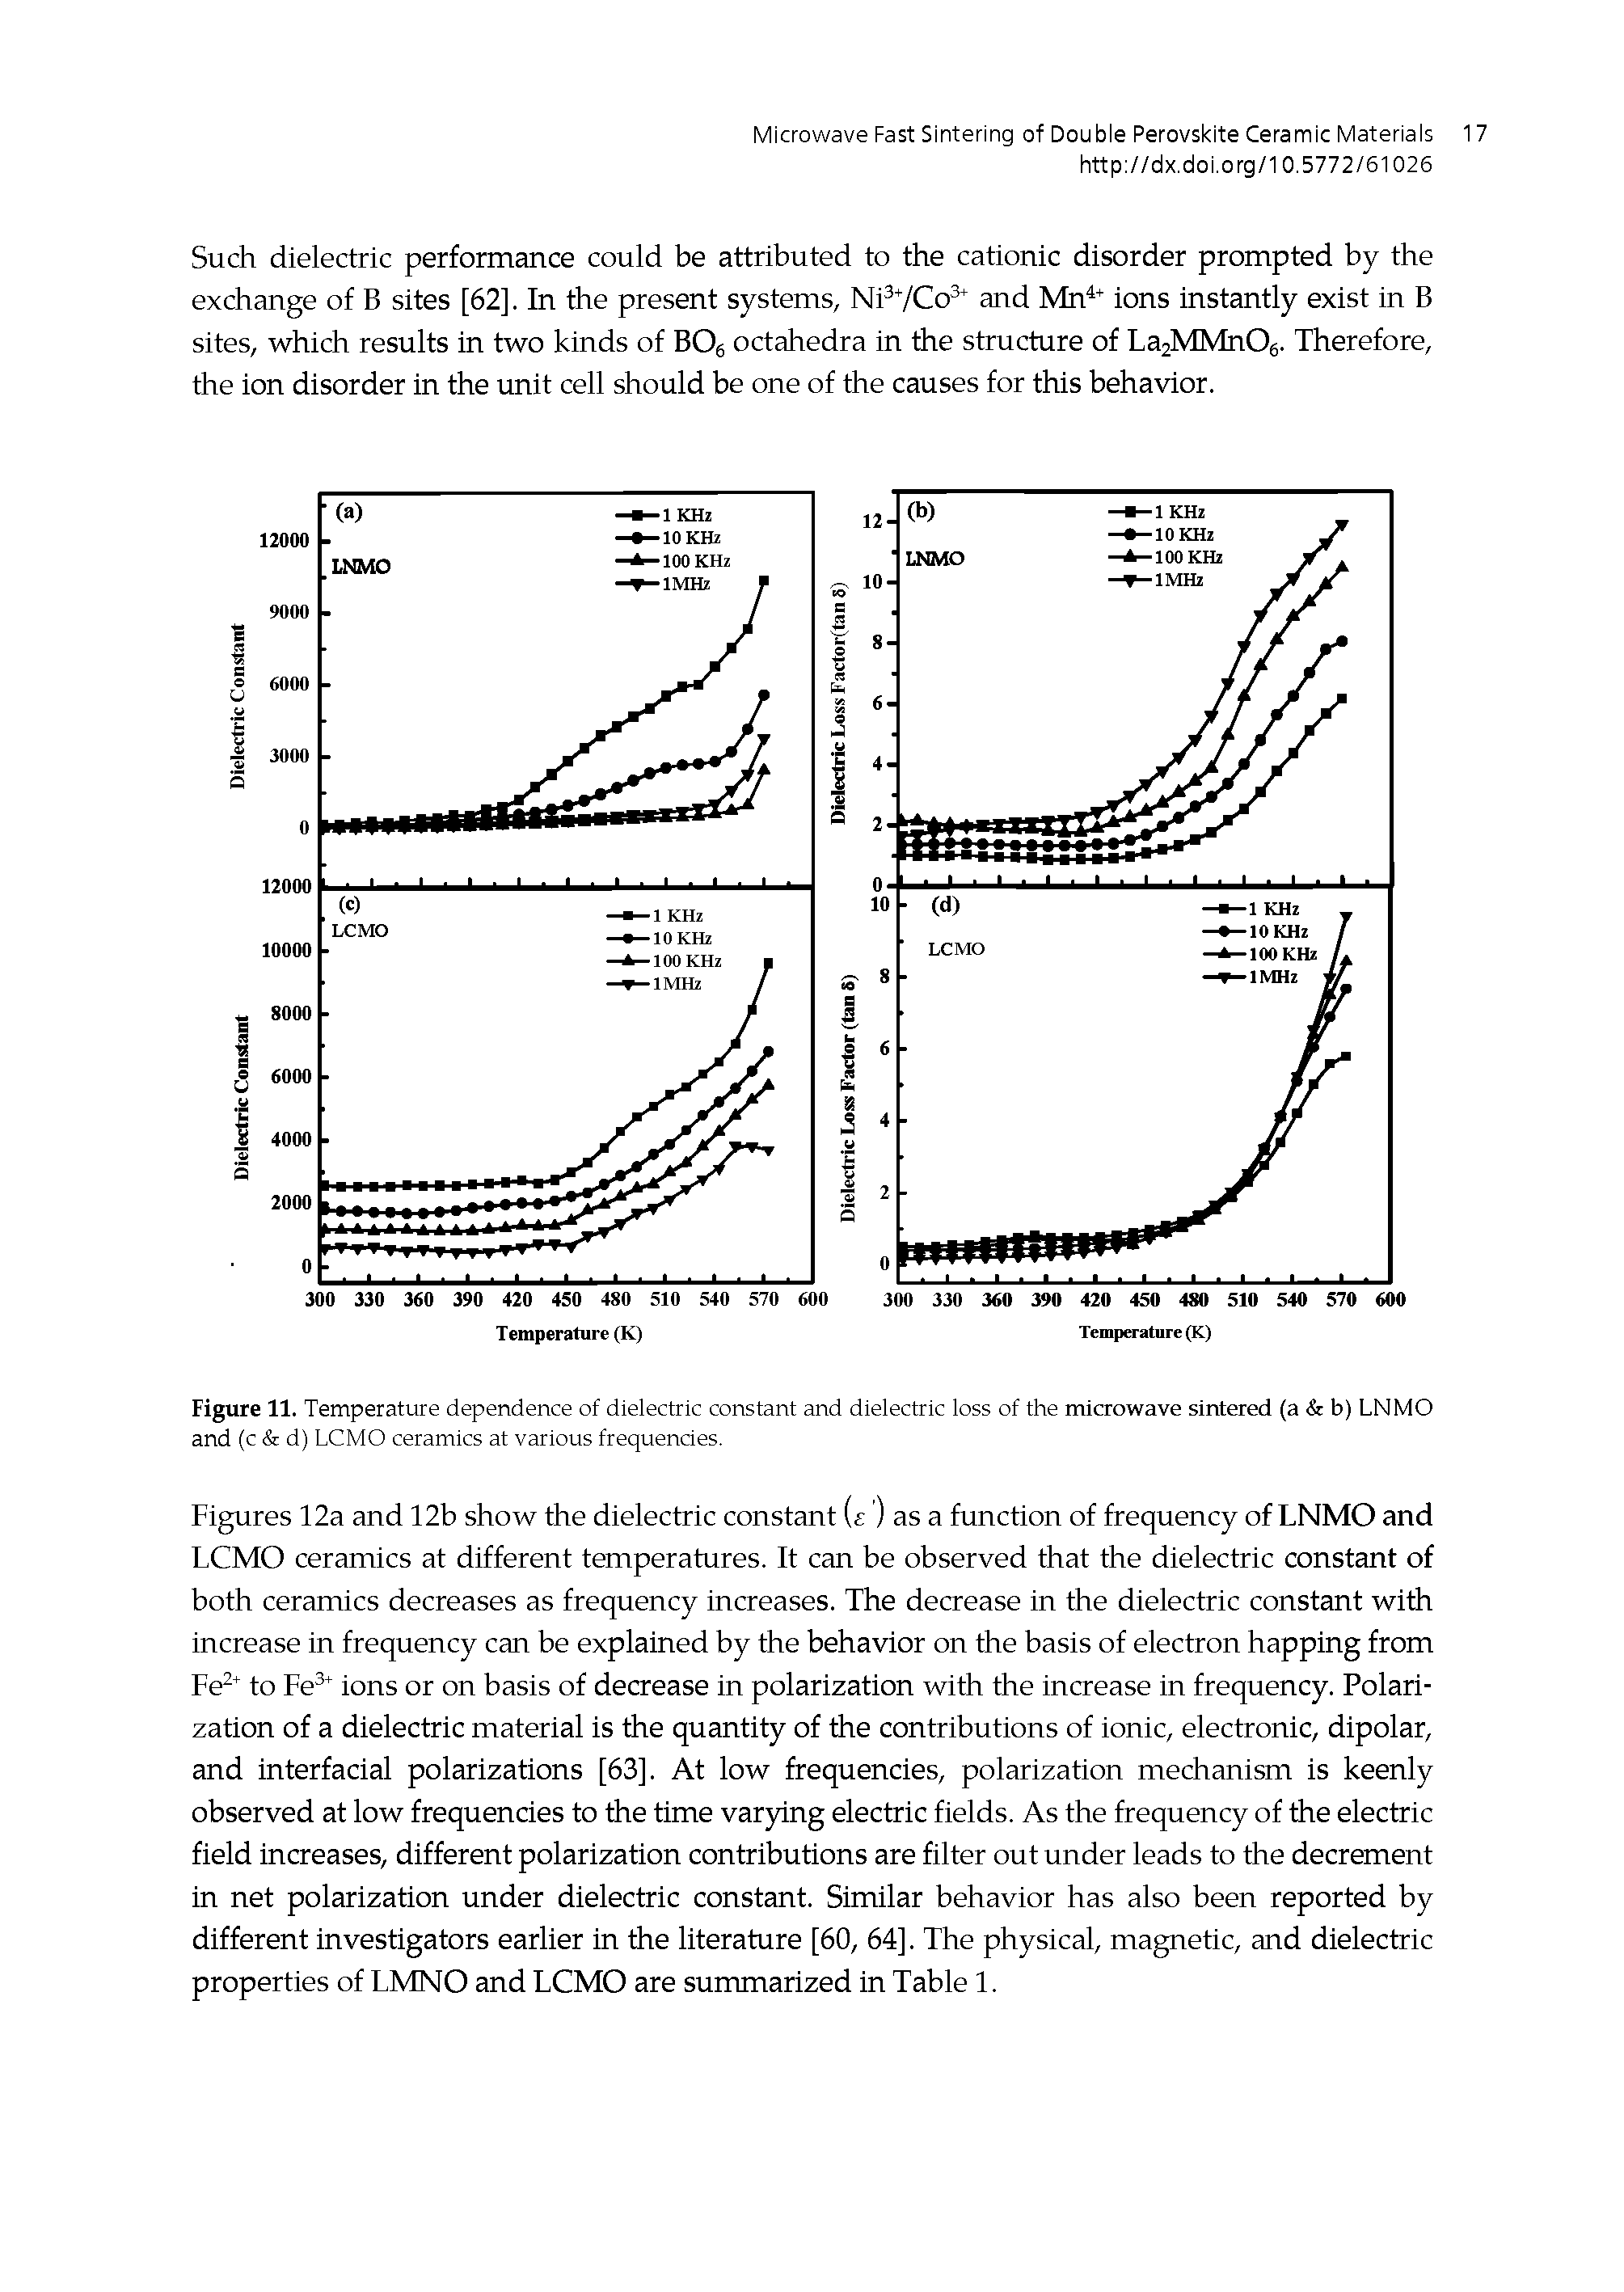 Figures 12a and 12b show the dielectric constant (c ) as a function of frequency of LNMO and LCMO ceramics at different temperatures. It can be observed that the dielectric constant of both ceramics decreases as frequency increases. The decrease in the dielectric constant with increase in frequency can be explained by the behavior on the basis of electron happing from Fe to Fe ions or on basis of decrease in polarization with the increase in frequency. Polarization of a dielectric material is the quantity of the contributions of ionic, electronic, dipolar, and interfacial polarizations [63]. At low frequencies, polarization mechanism is keenly observed at low frequencies to the time var)ing electric fields. As the frequency of the electric field increases, different polarization contributions are filter out under leads to the decrement in net polarization under dielectric constant. Similar behavior has also been reported by different investigators earlier in the literature [60, 64]. The physical, magnetic, and dielectric properties of LMNO and LCMO are summarized in Table 1.